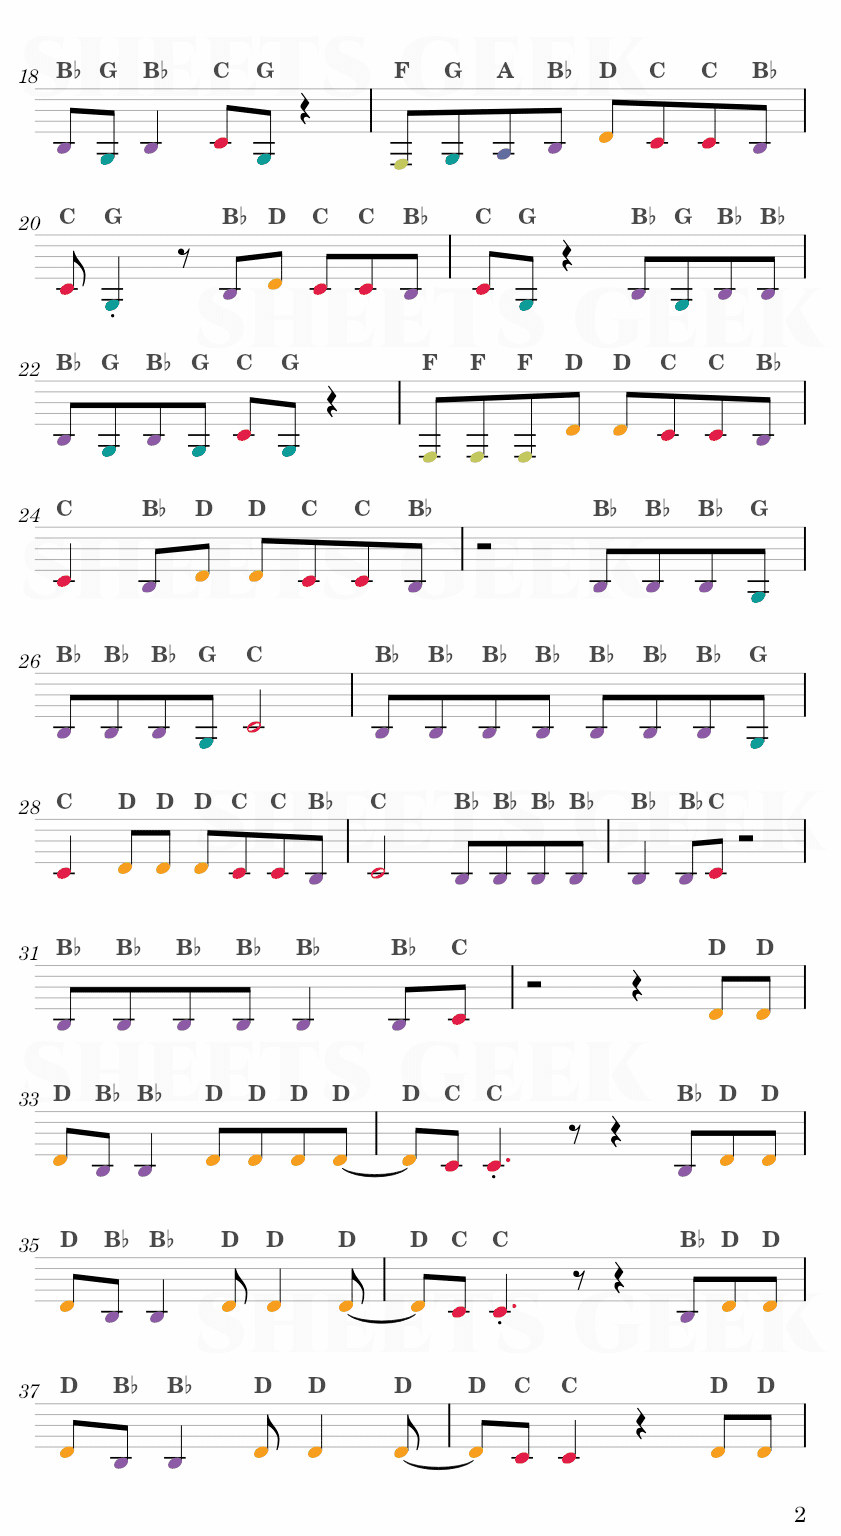 Mood - 24kGoldn ft. iann dior Easy Sheet Music Free for piano, keyboard, flute, violin, sax, cello page 2